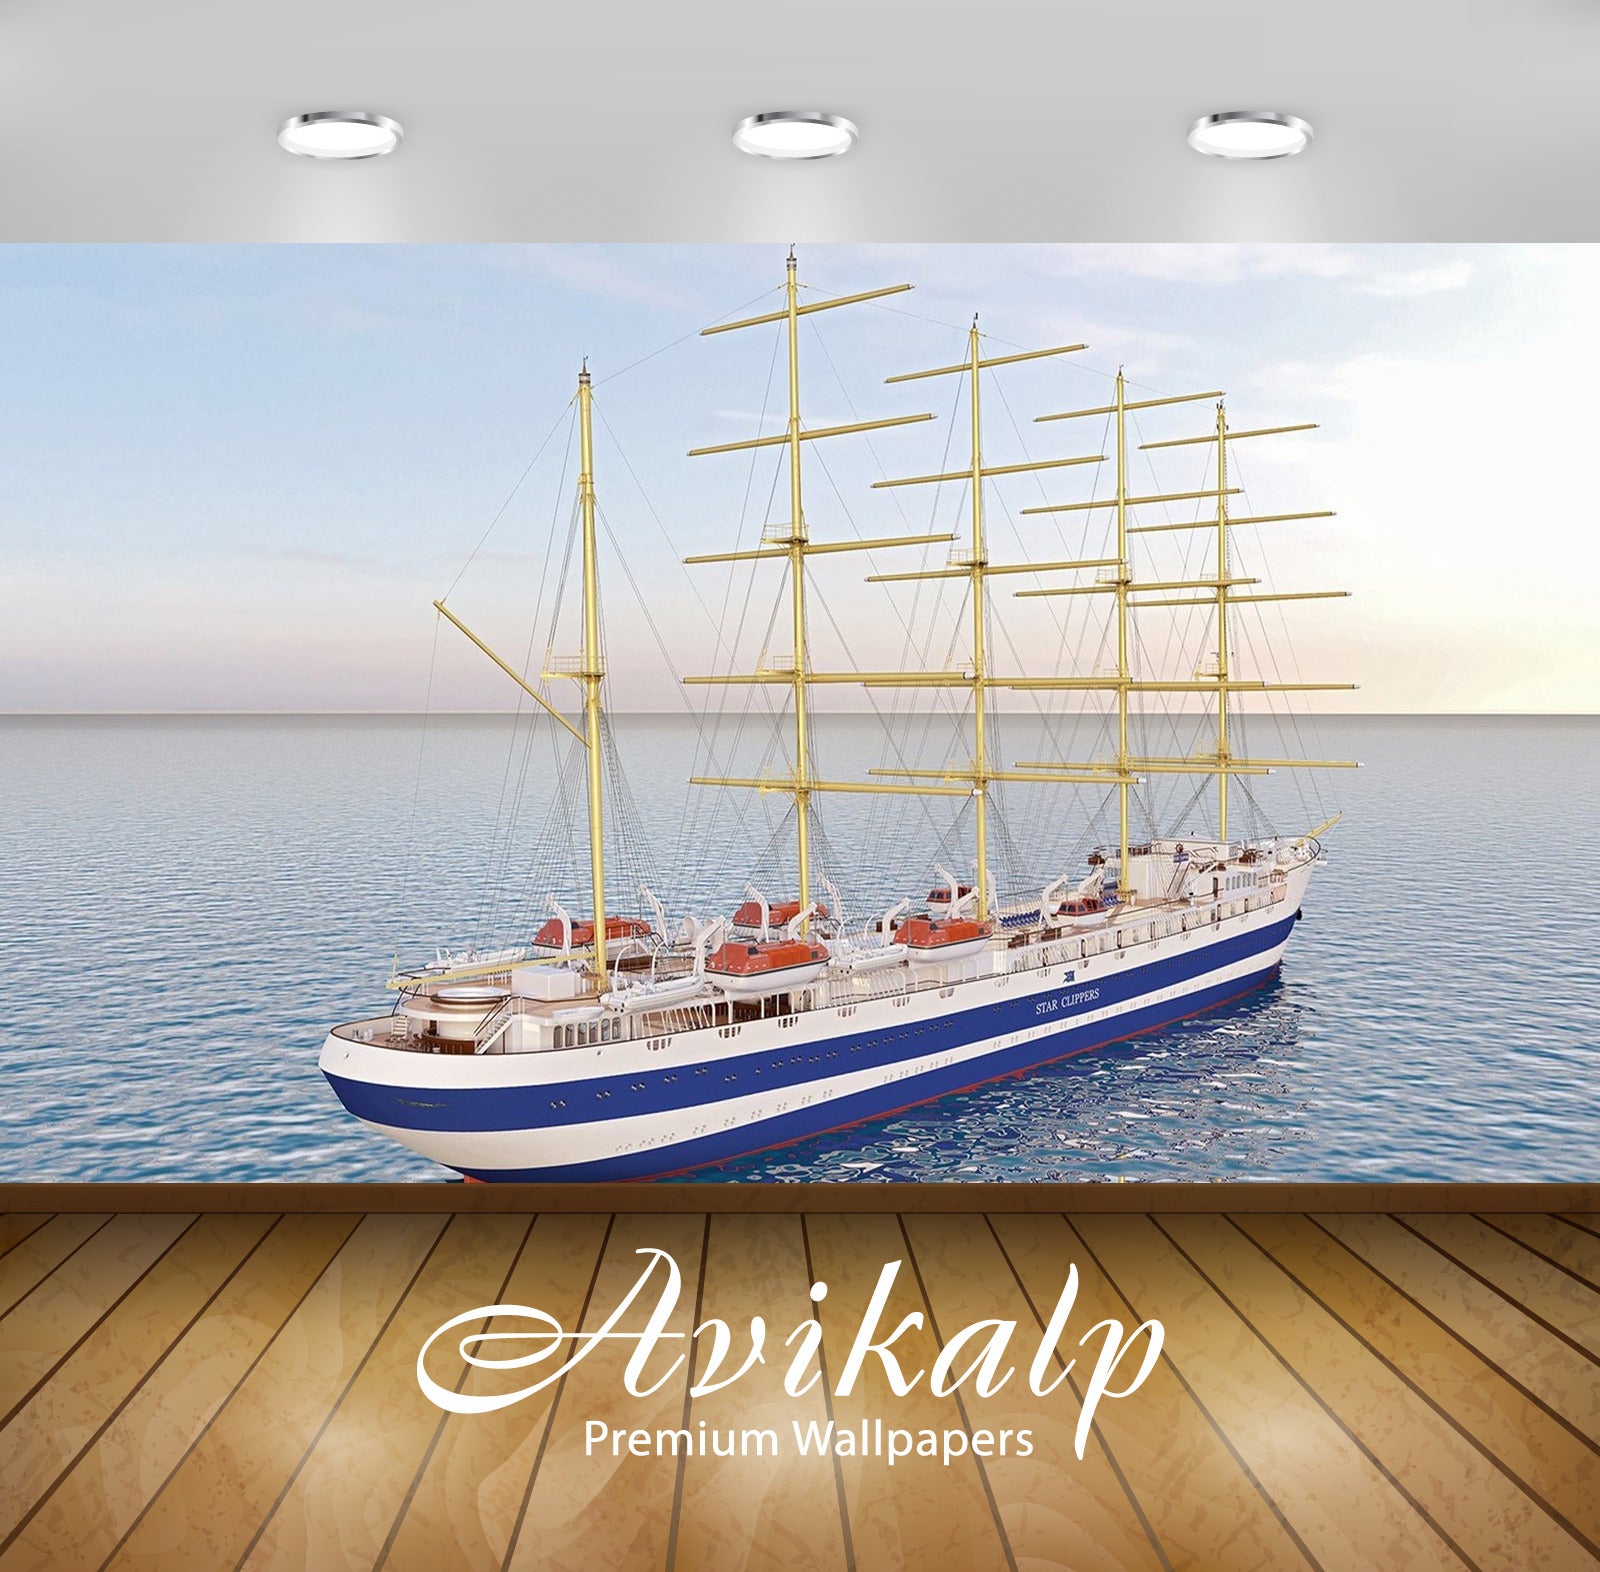 Avikalp Exclusive Awi2359 A New Ship For The Fleet Star Clipper Full HD Wallpapers for Living room,